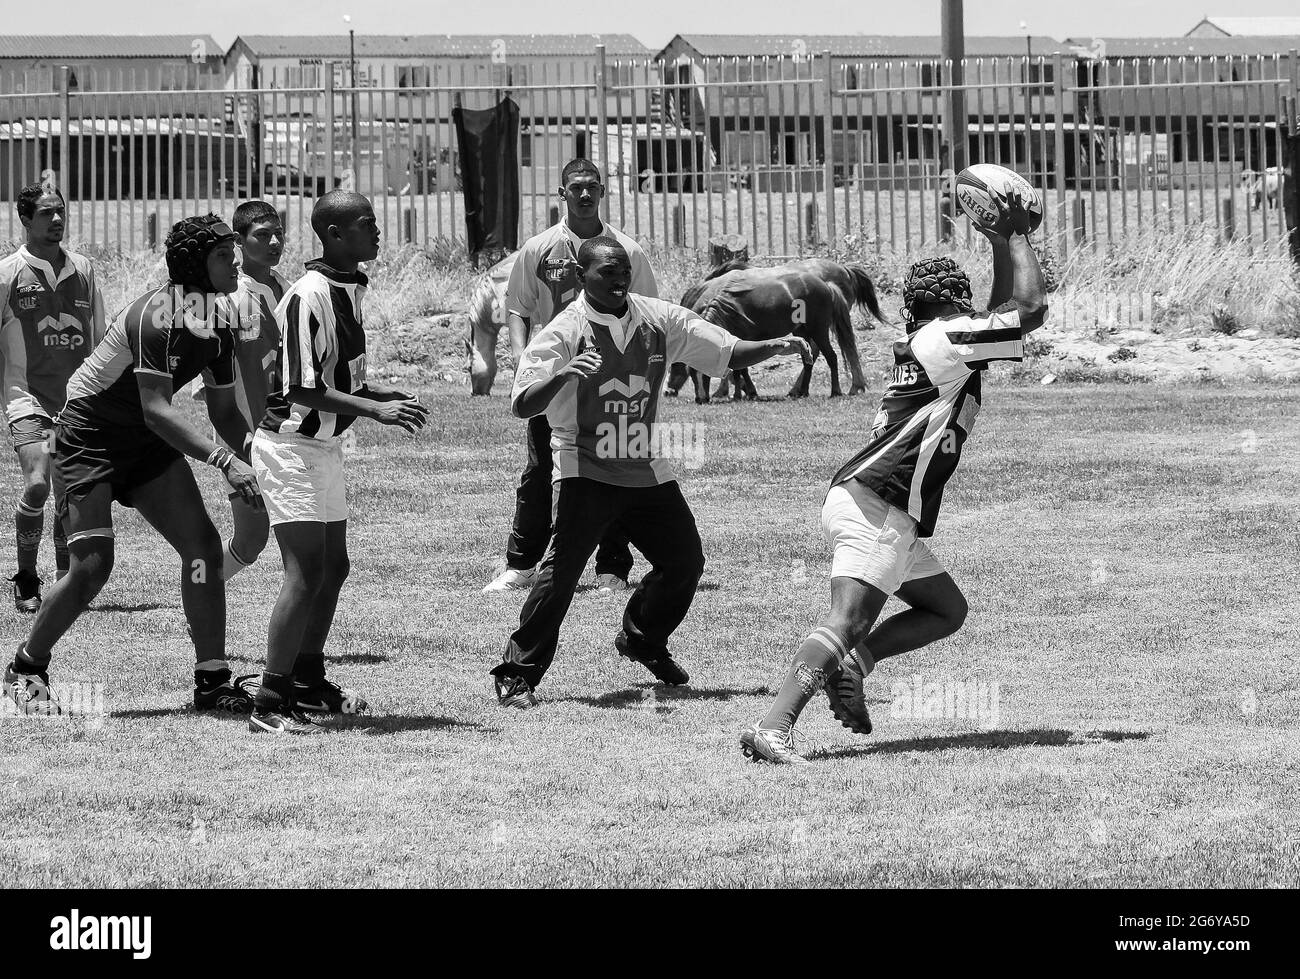 CAPE TOWN, SOUTH AFRICA - Jan 05, 2021: Cape Town, South Africa, December 06, 2011, Diverse children playing Rugby at school Stock Photo